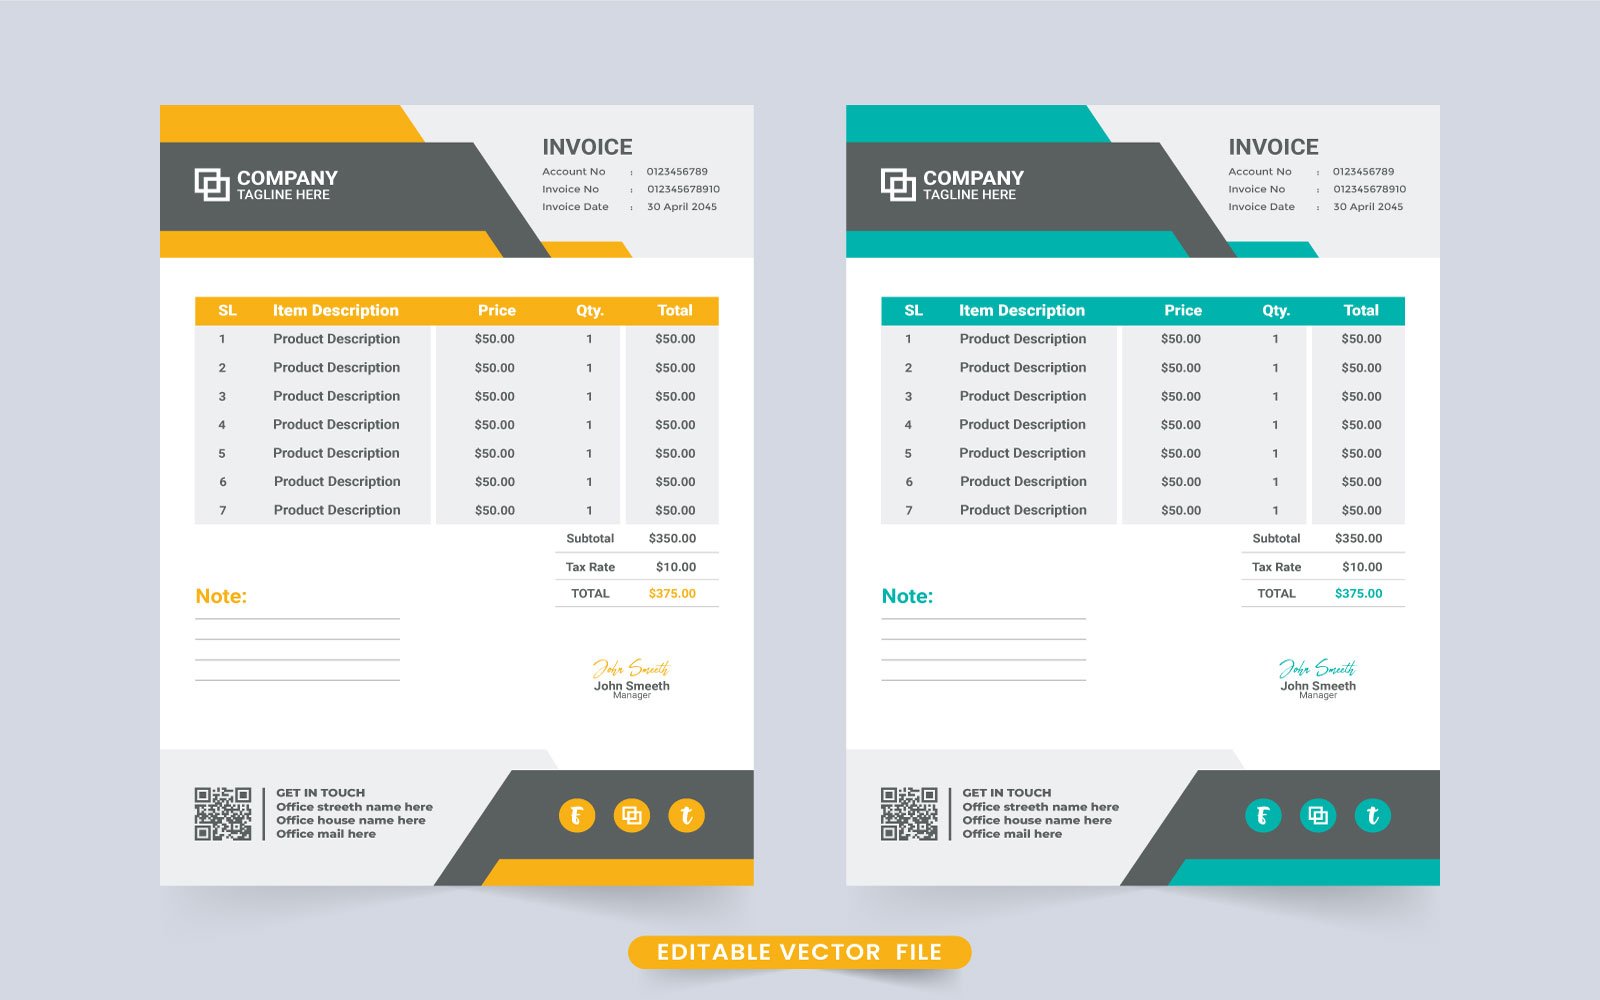 Template #272345 Invoice Template Webdesign Template - Logo template Preview